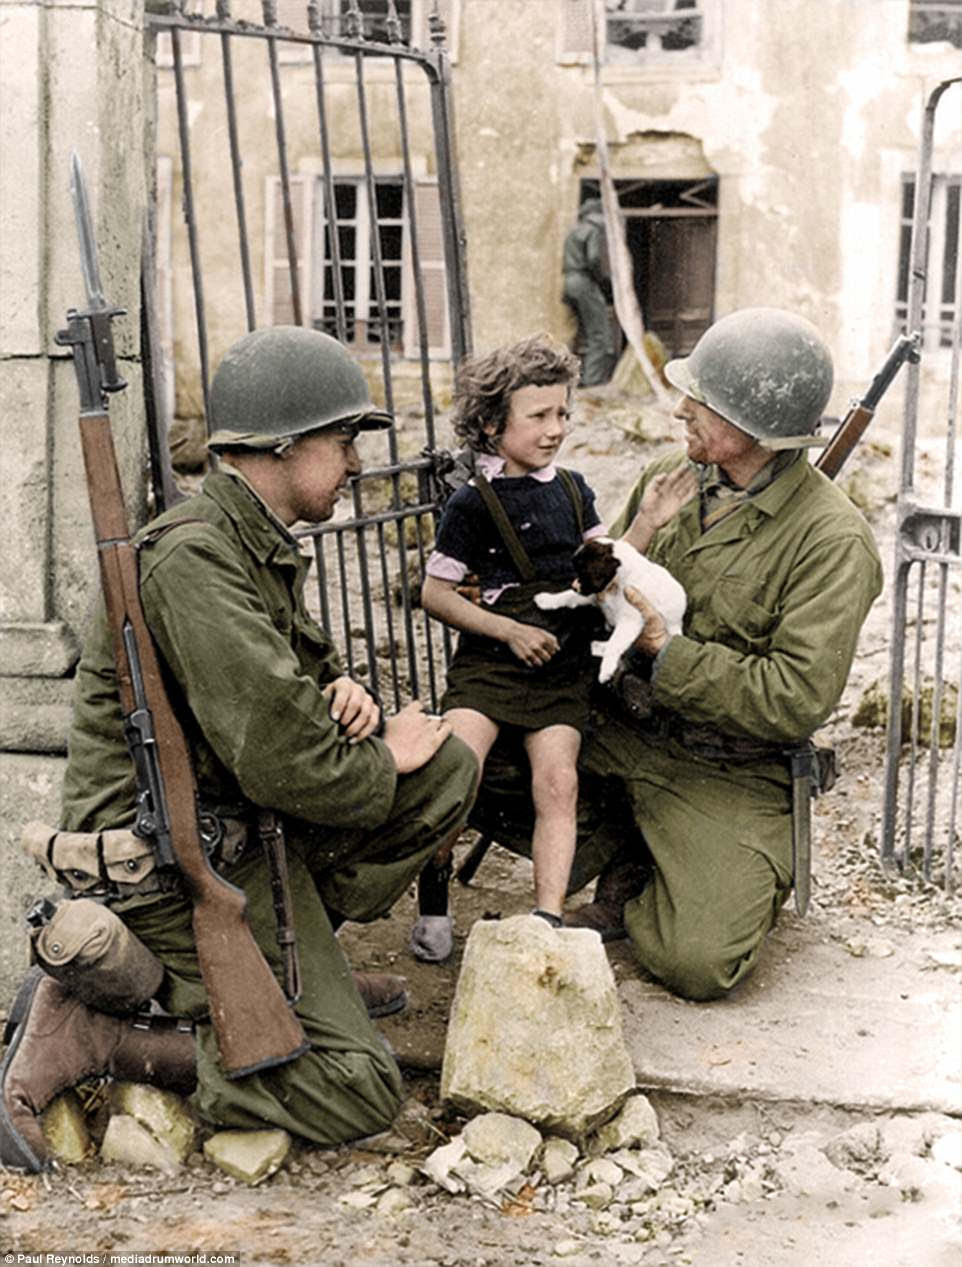 Soldiers comfort a girl with a puppy in Colleville-sur-Mer, France, which is now the site of the Normandy American Cemetery and Memorial. The memorial in the commune replaced a temporary cemetery established by the US First Army in June 1944